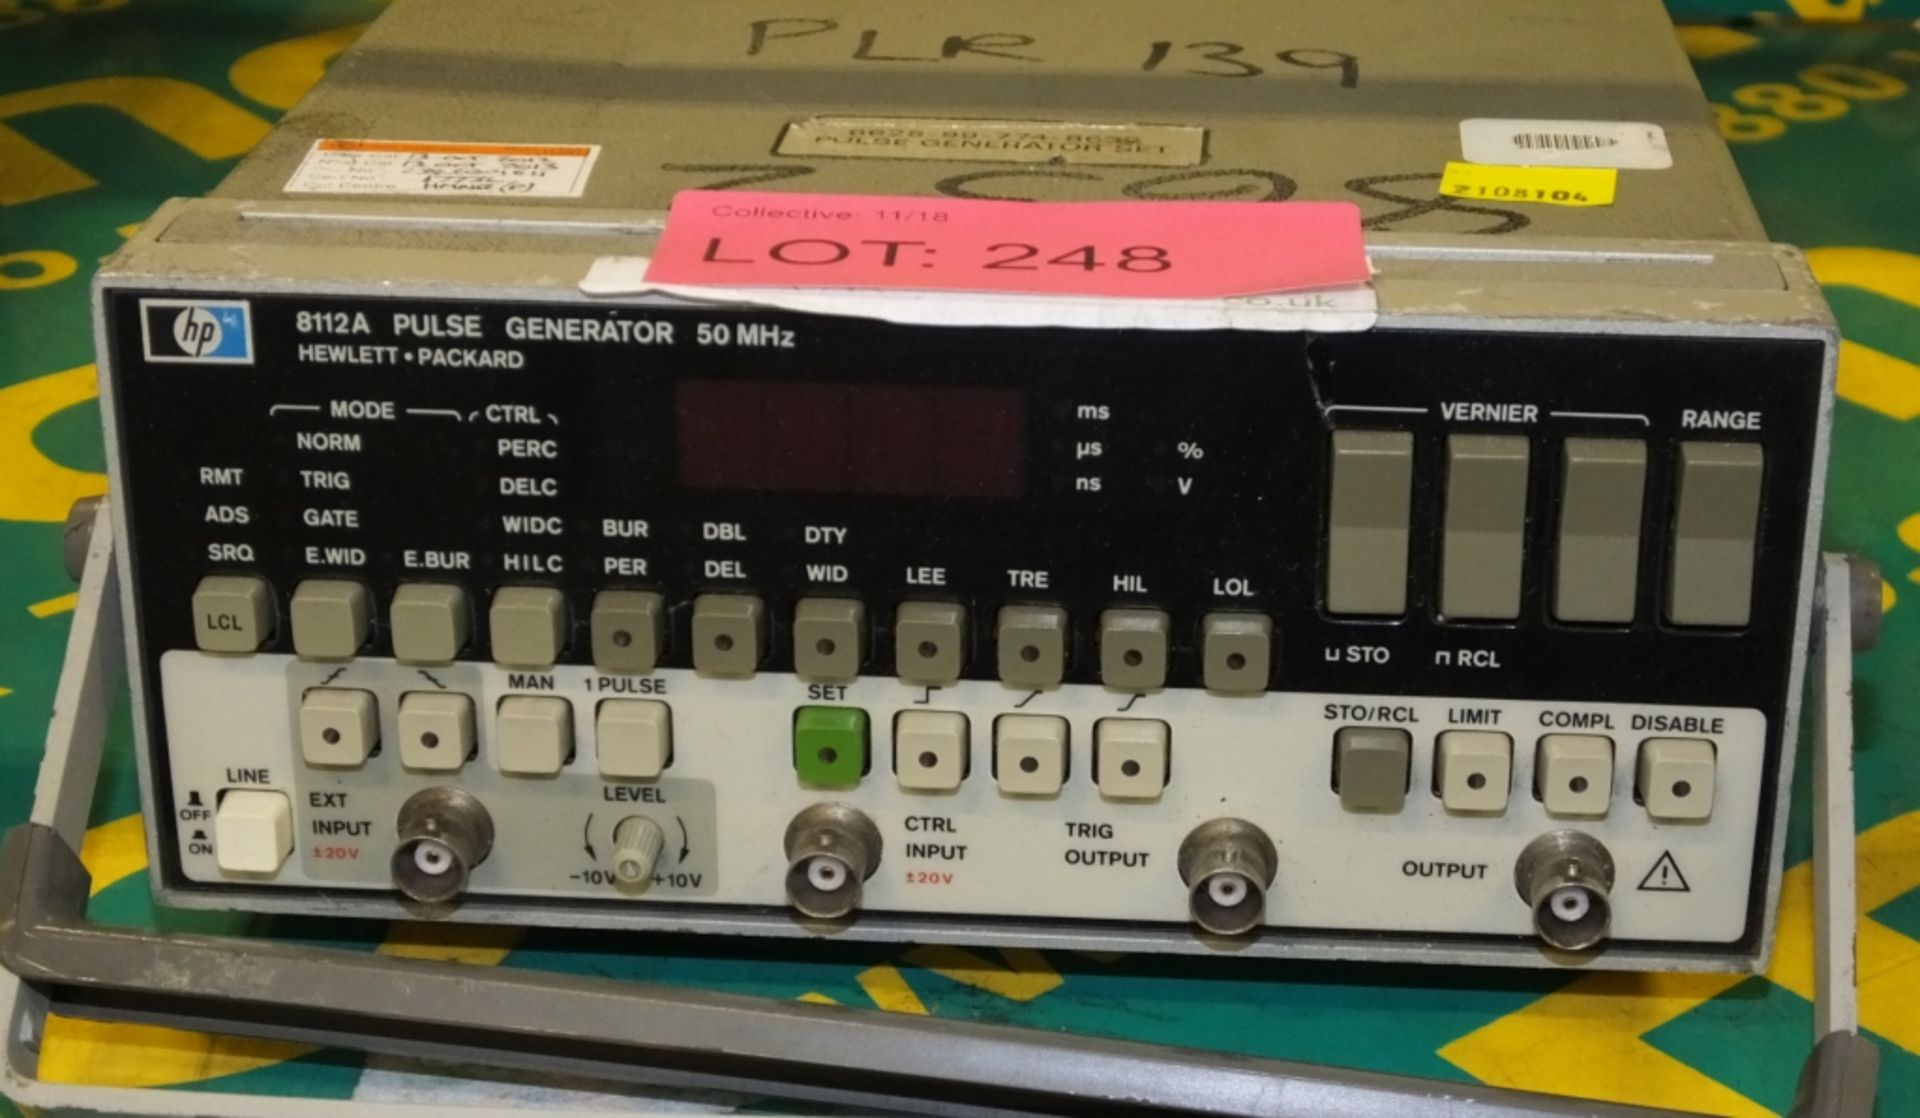 HP 8112A Pulse Generator - 50mhz - Image 2 of 2